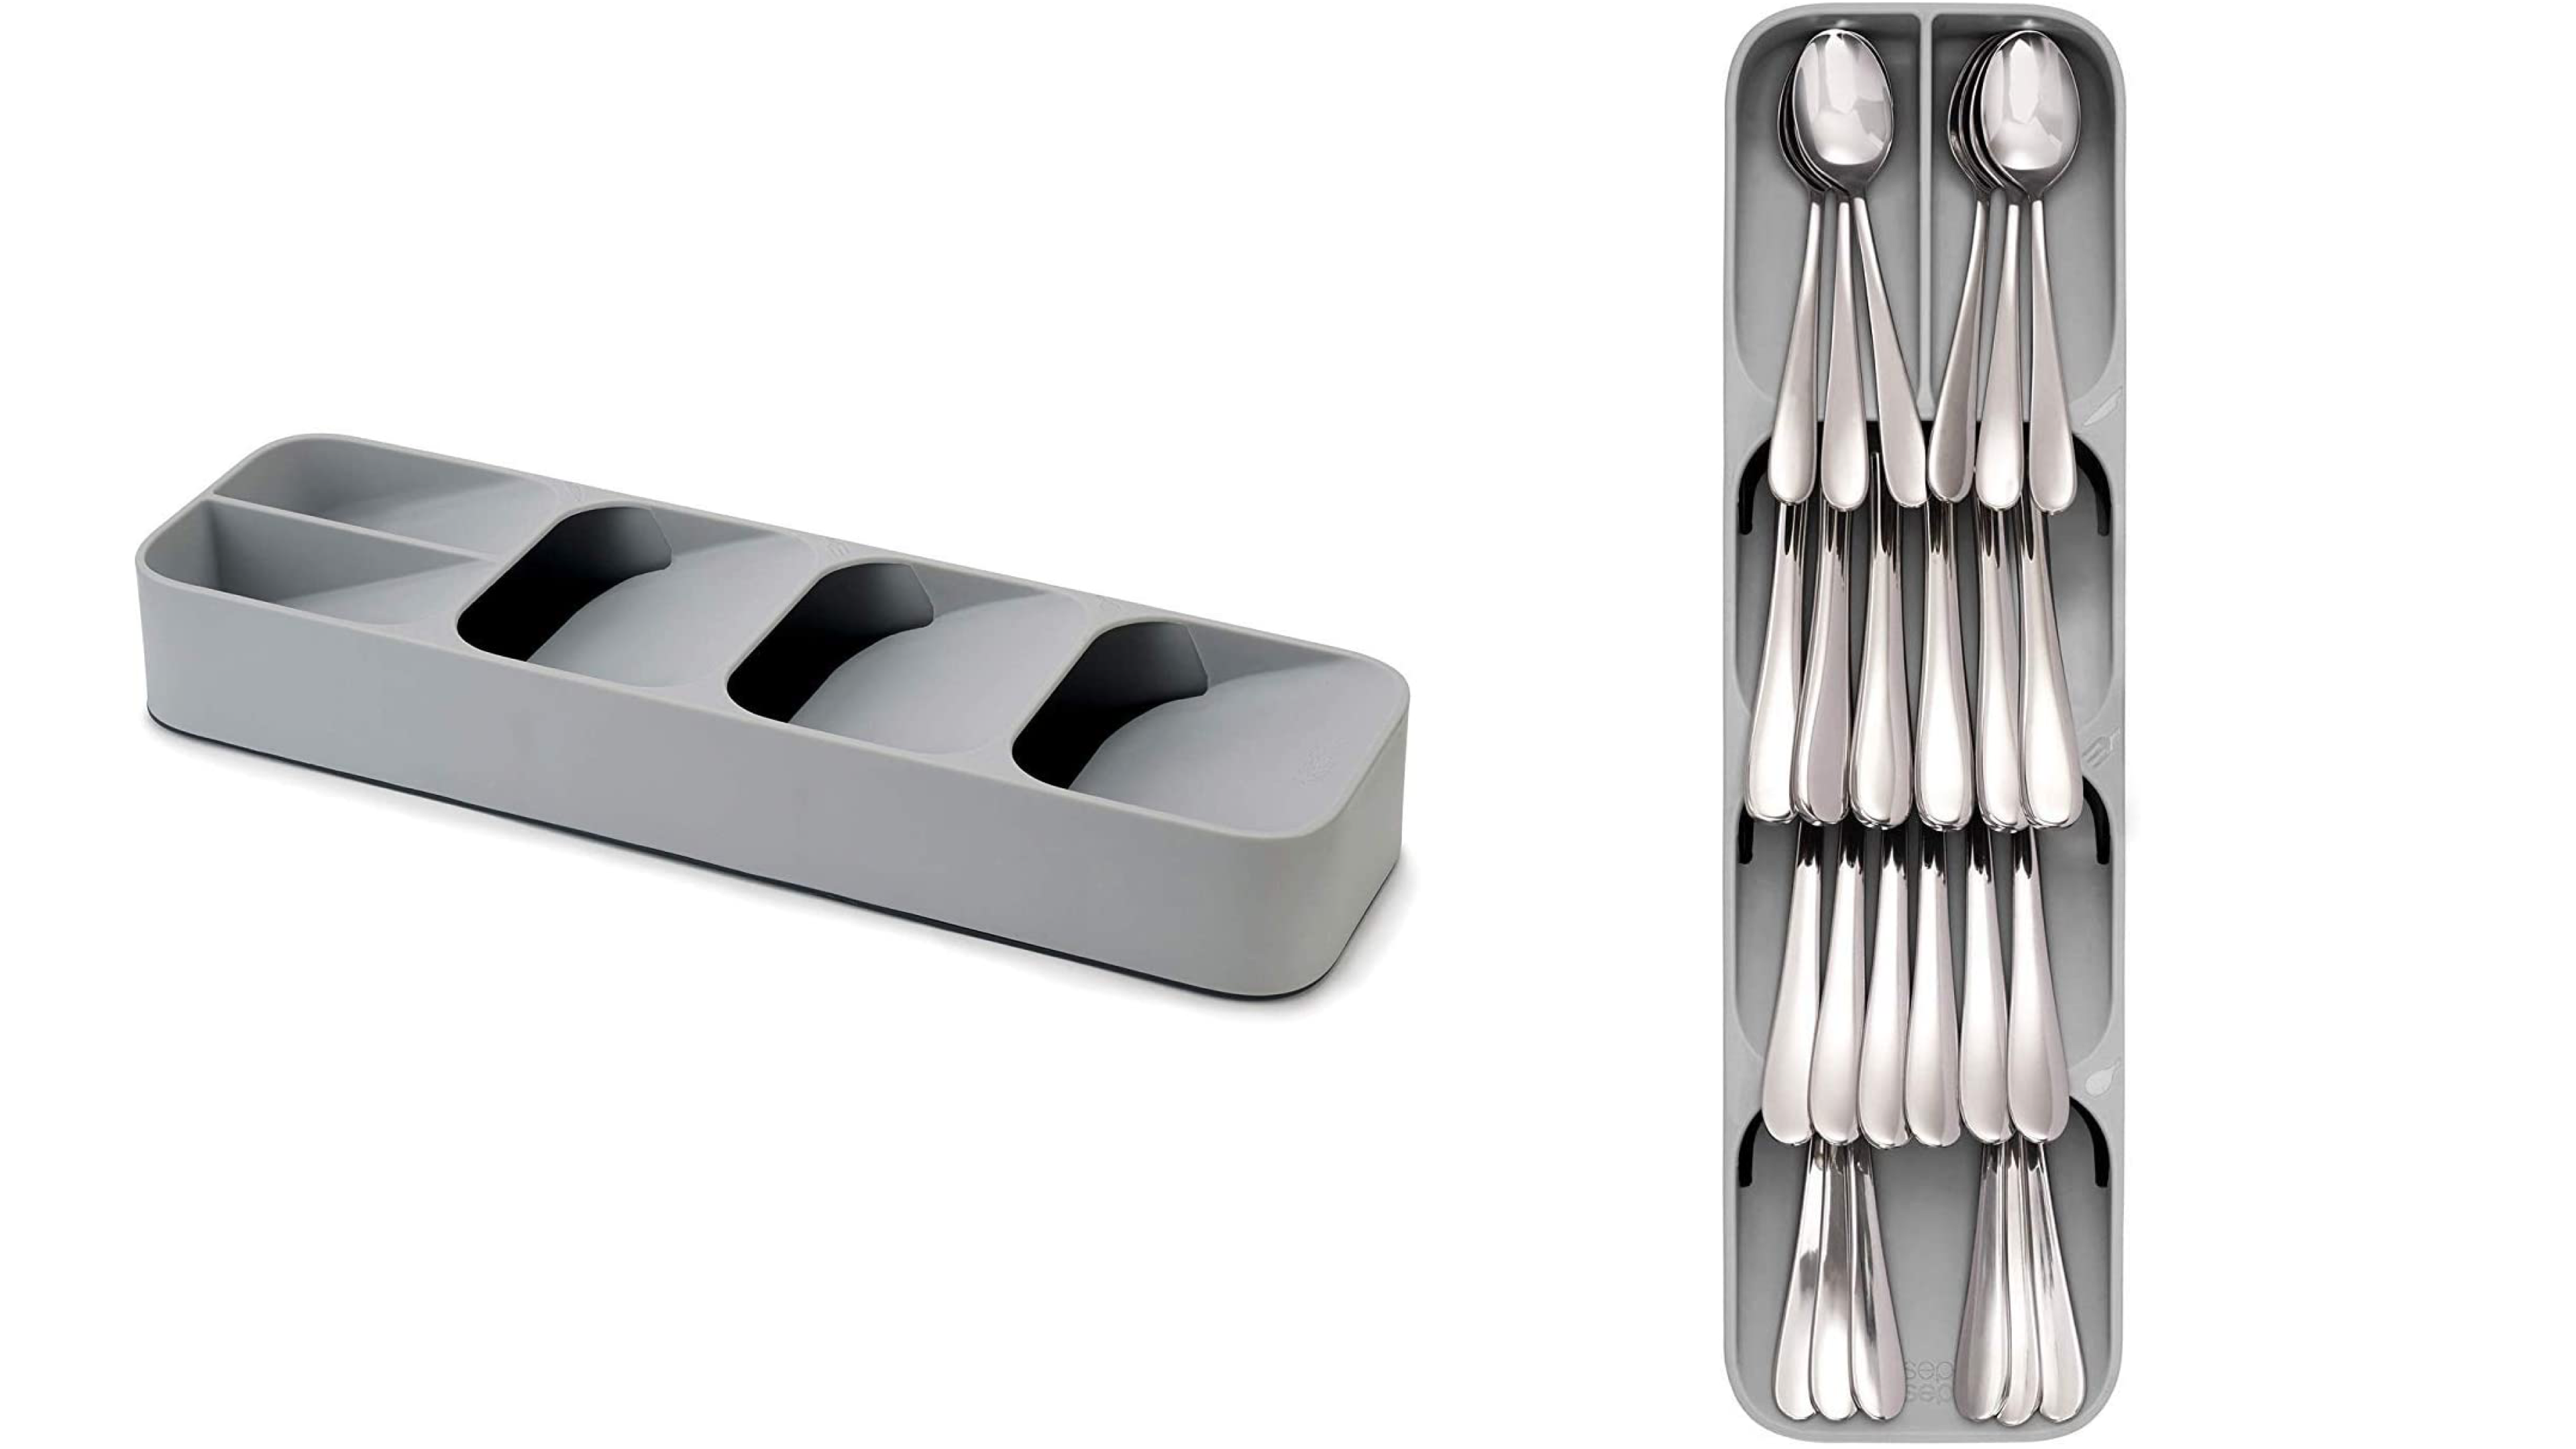 cutlery organizer that stacks utensils vertically not horizontally to save space